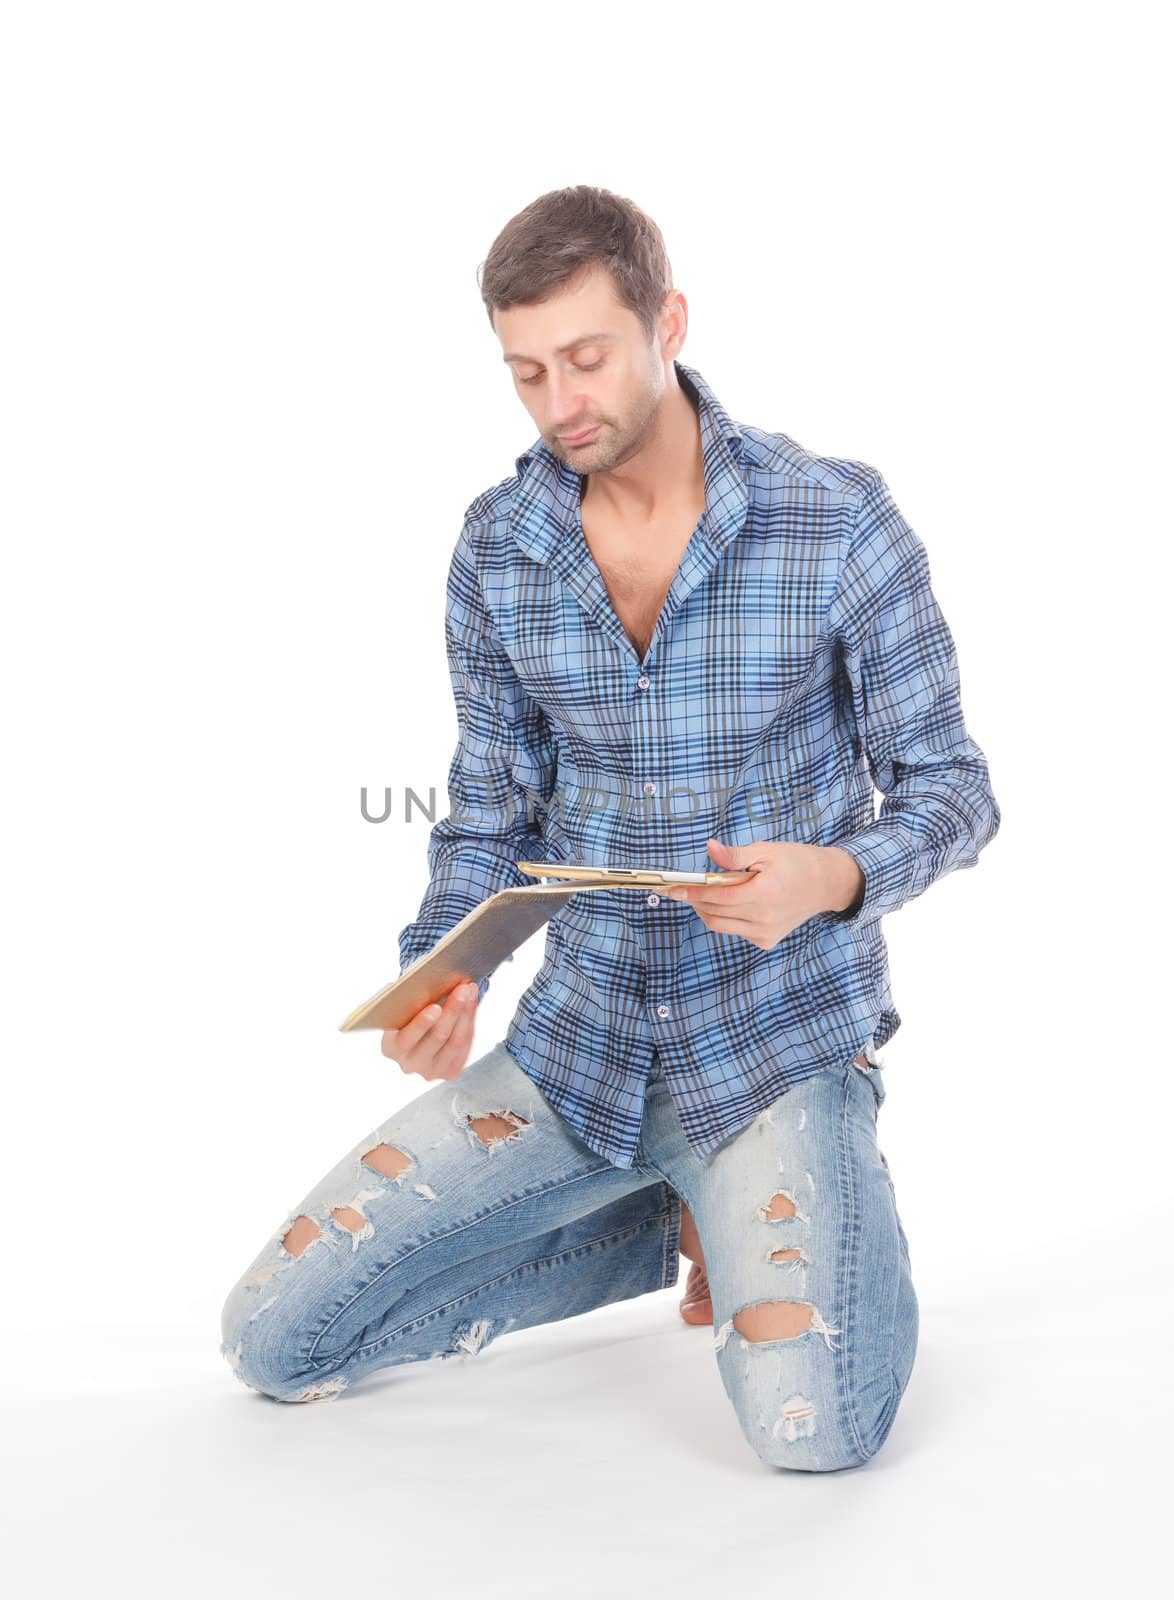 Casual mature man in ragged jeans kneeling barefoot on the floor reading from a tablet pad which he is hand holding